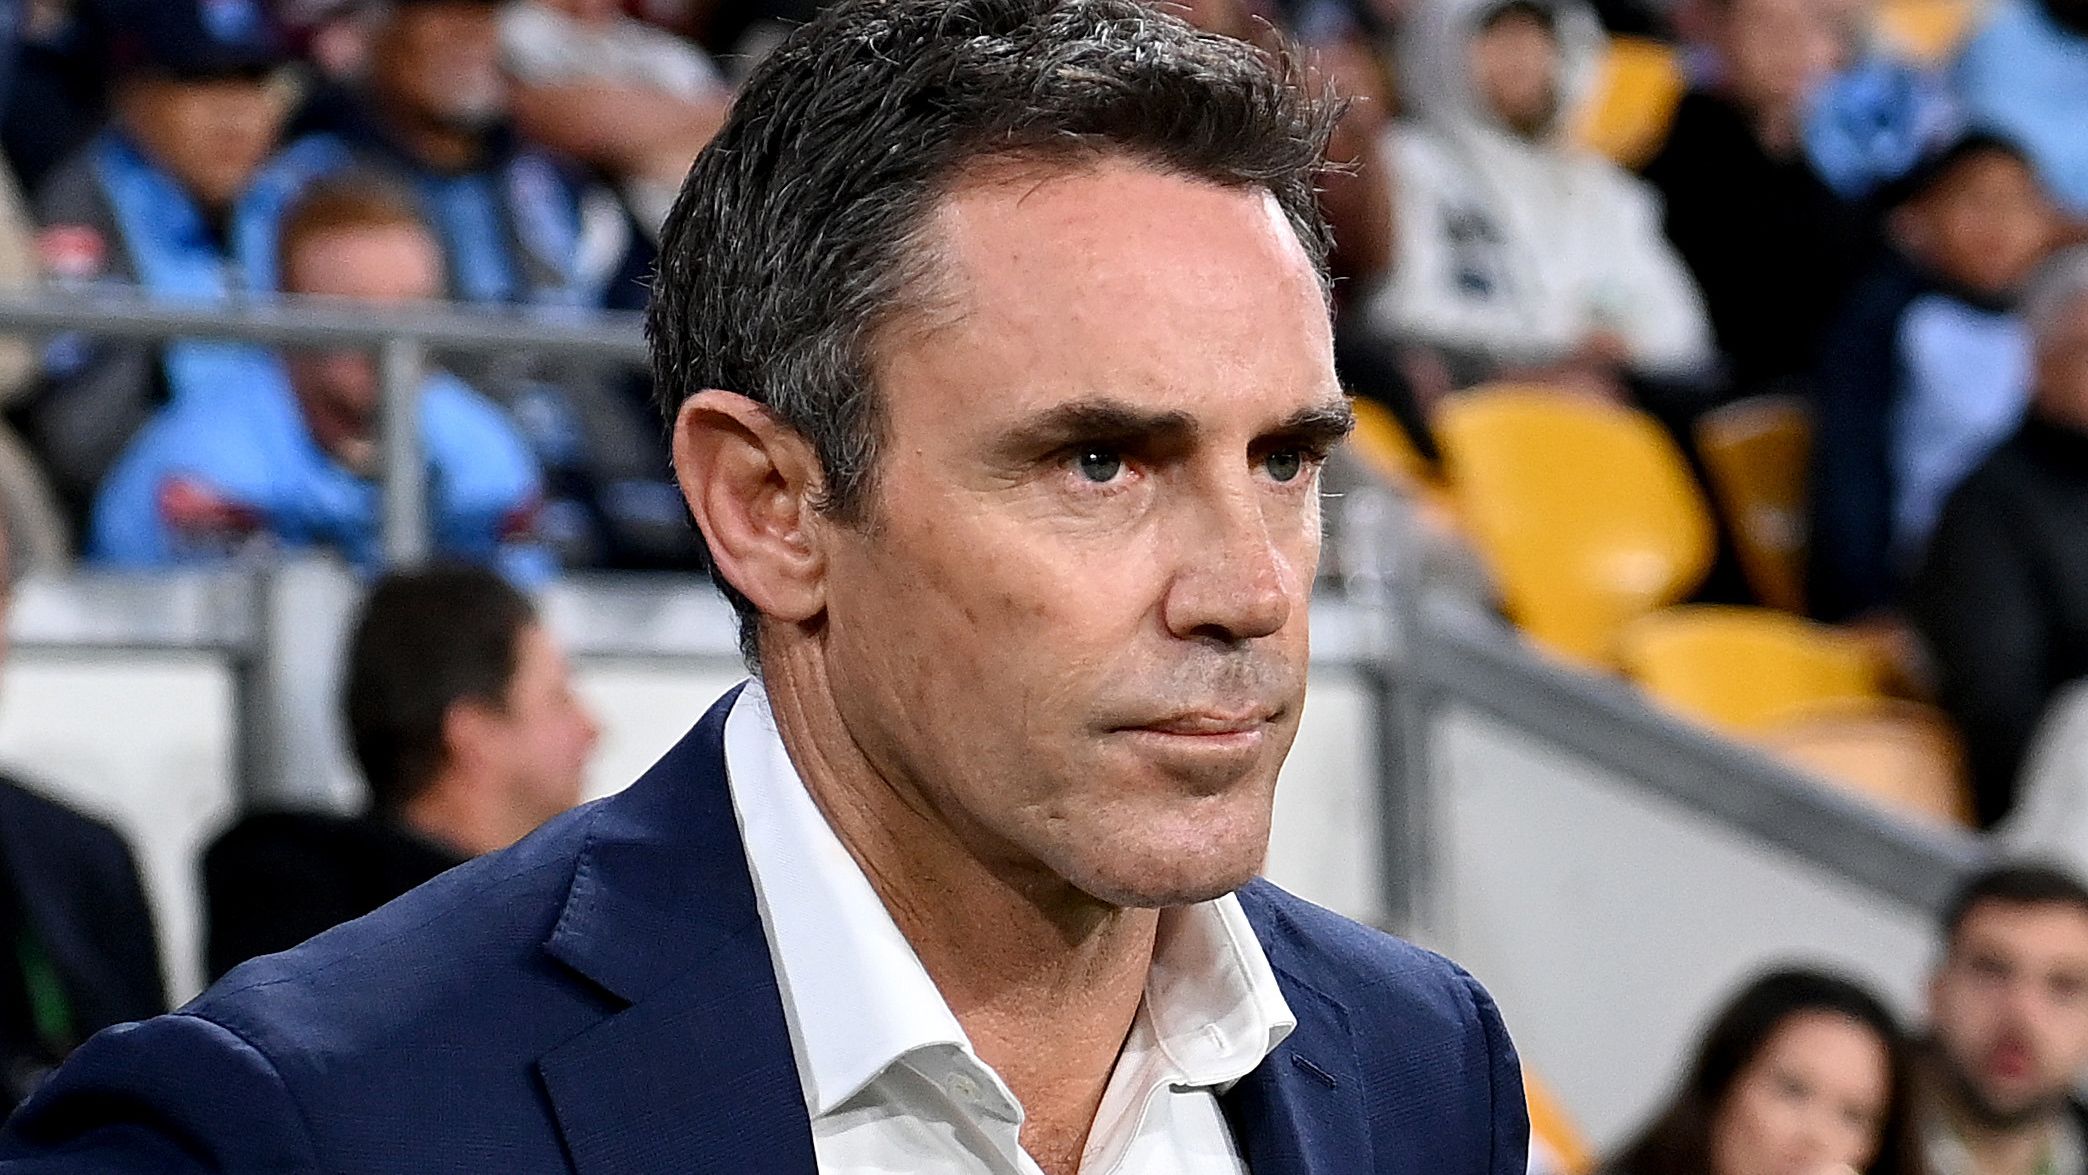 BRISBANE, AUSTRALIA - JUNE 21: Coach Brad Fittler of New South Wales looks dejected as his team loses game two of the State of Origin series between the Queensland Maroons and the New South Wales Blues at Suncorp Stadium on June 21, 2023 in Brisbane, Australia. (Photo by Bradley Kanaris/Getty Images)